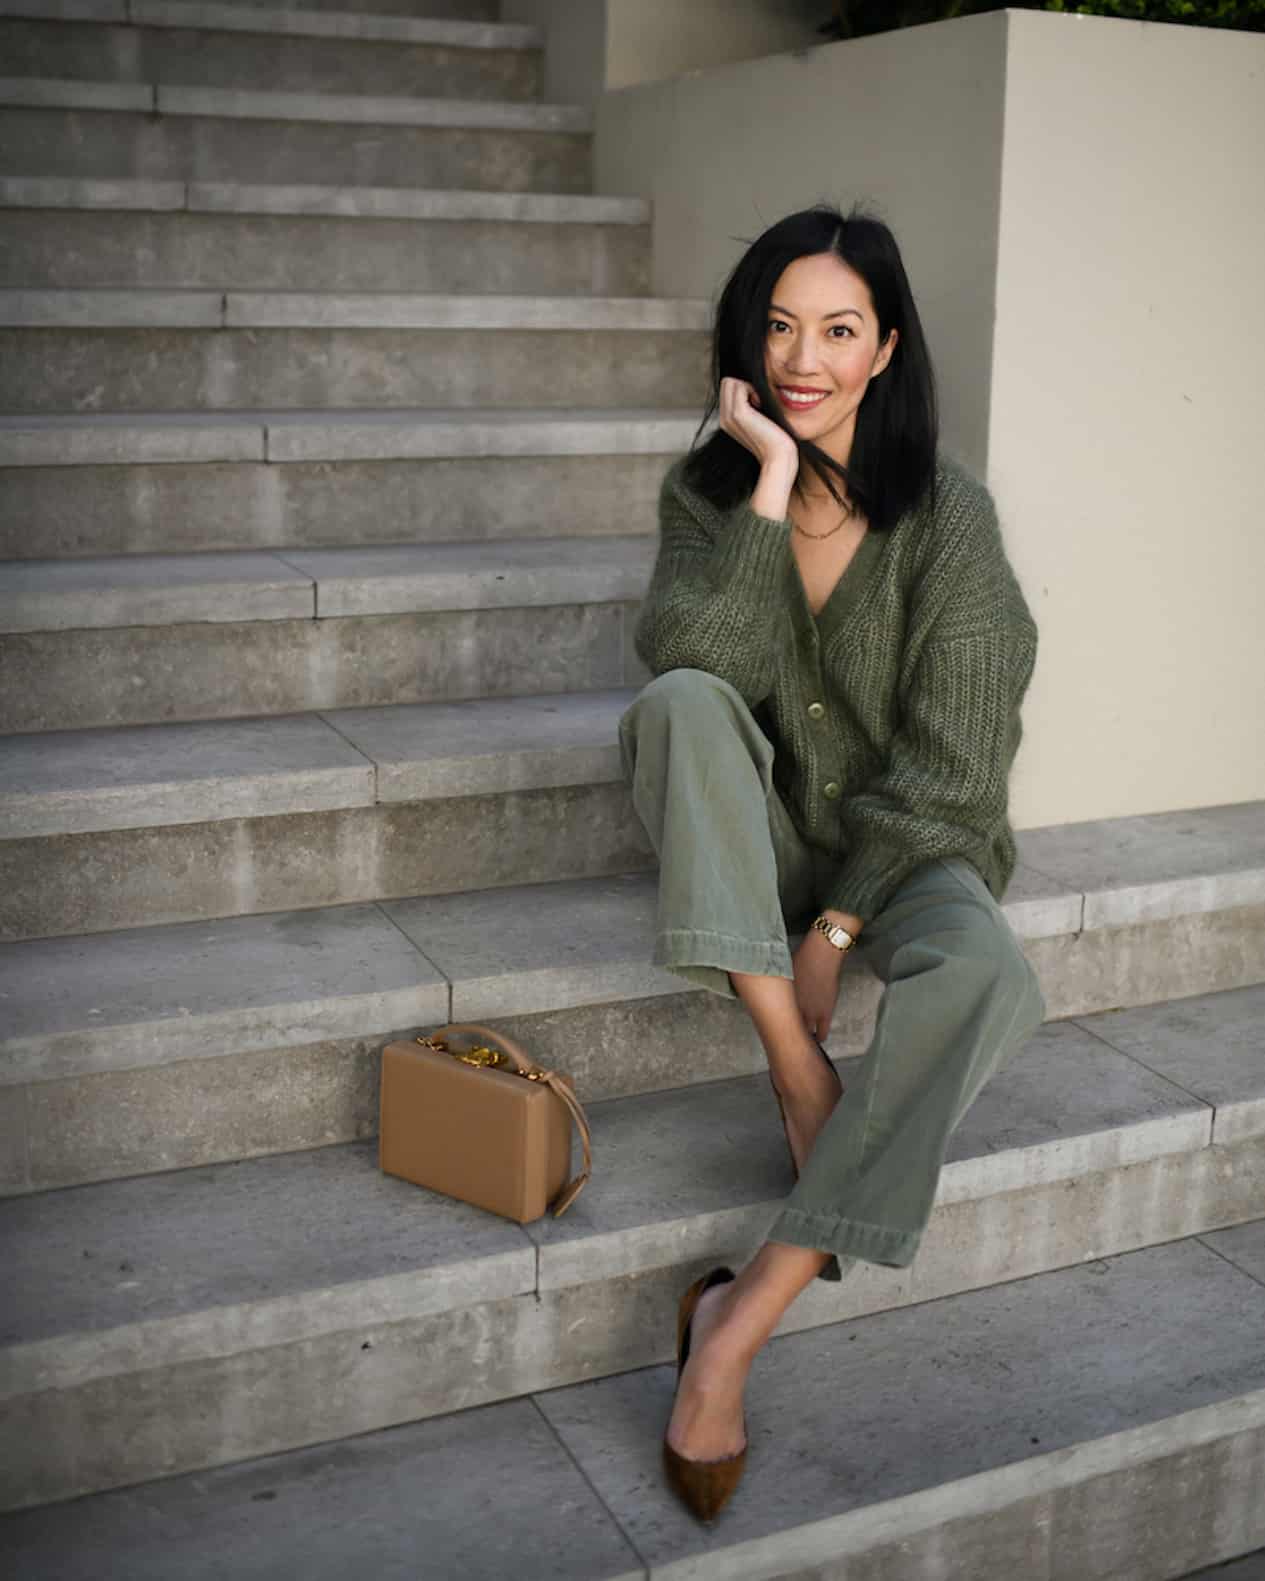 image of a woman sitting on set of stairs wearing a green cardigan, green pants, and brown suede heels